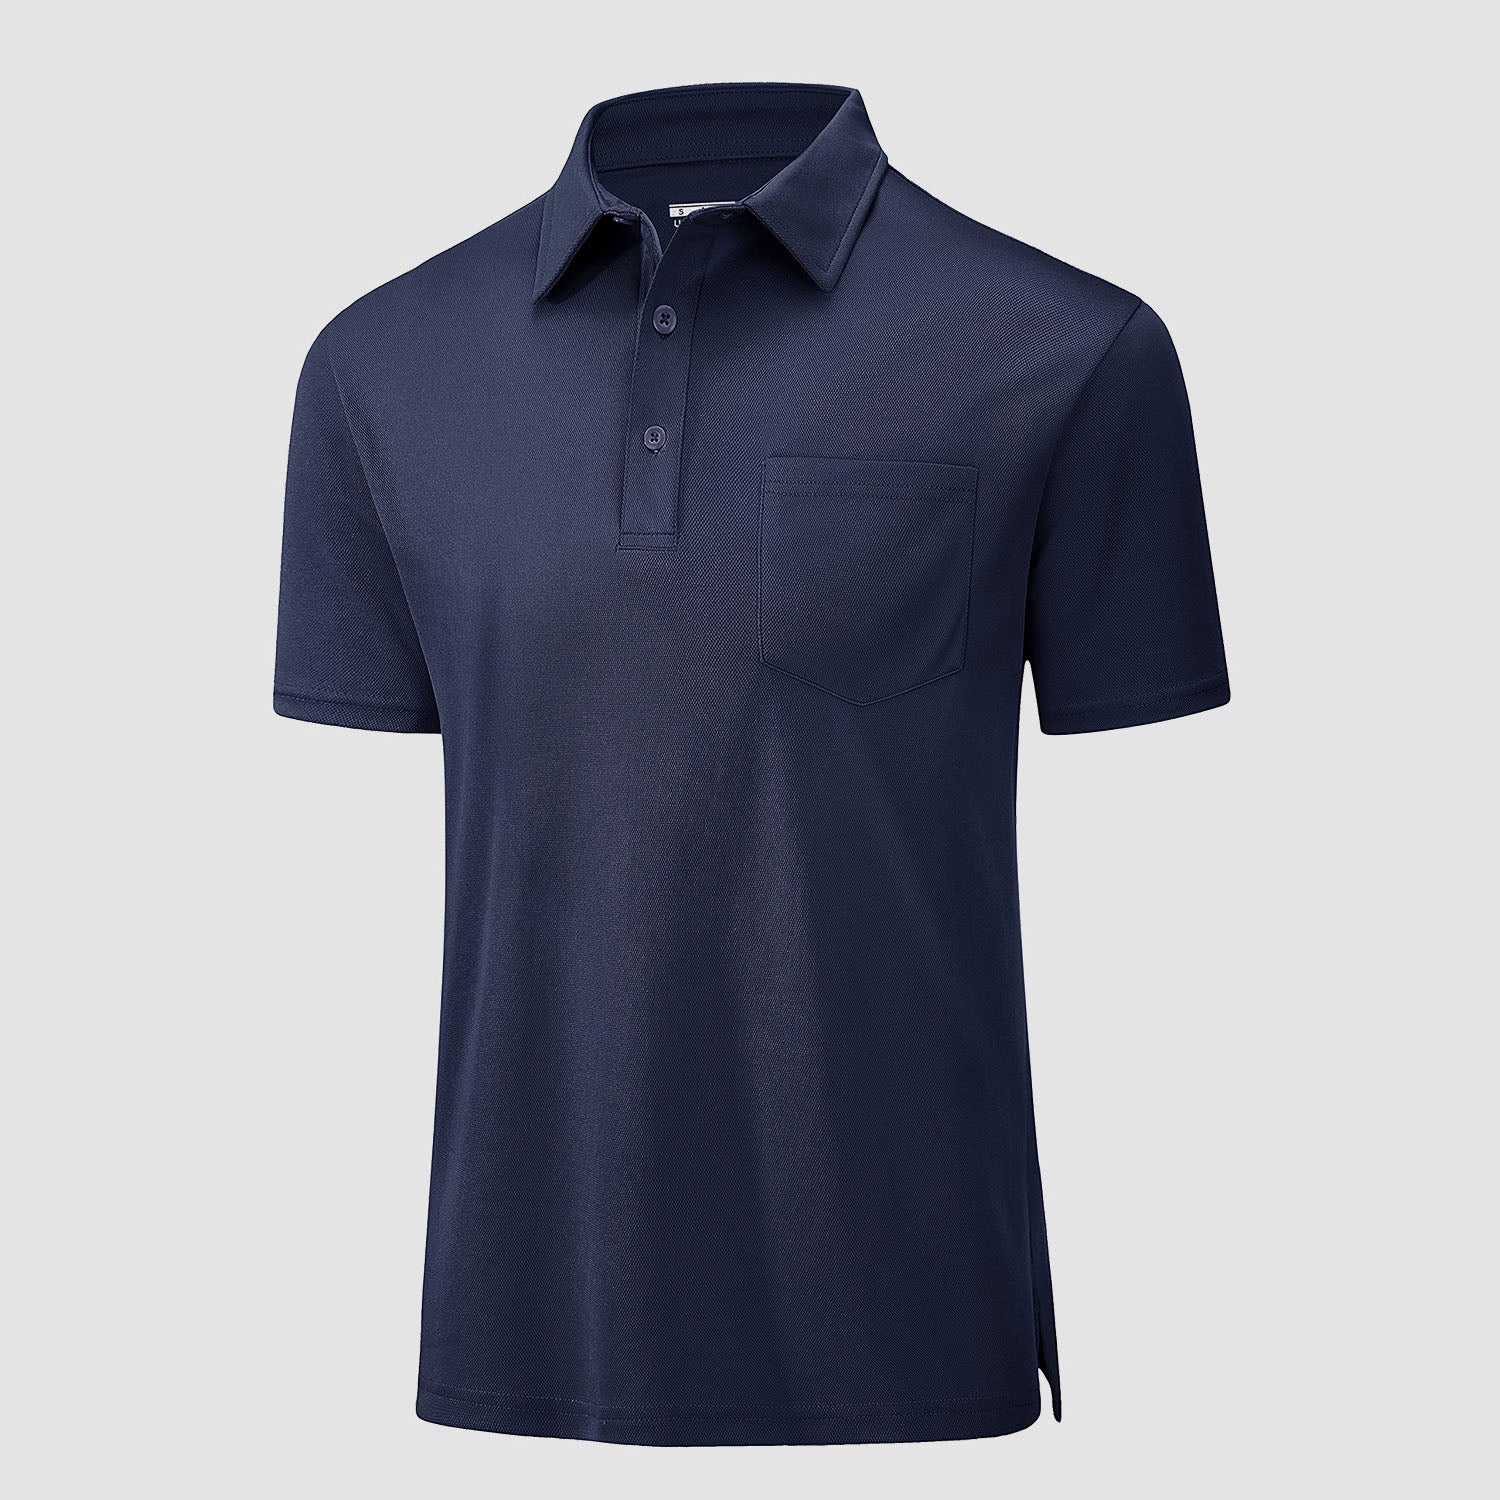 Polo Shirts for Men Short Sleeve  Golf Shirts Quick Dry with Pocket